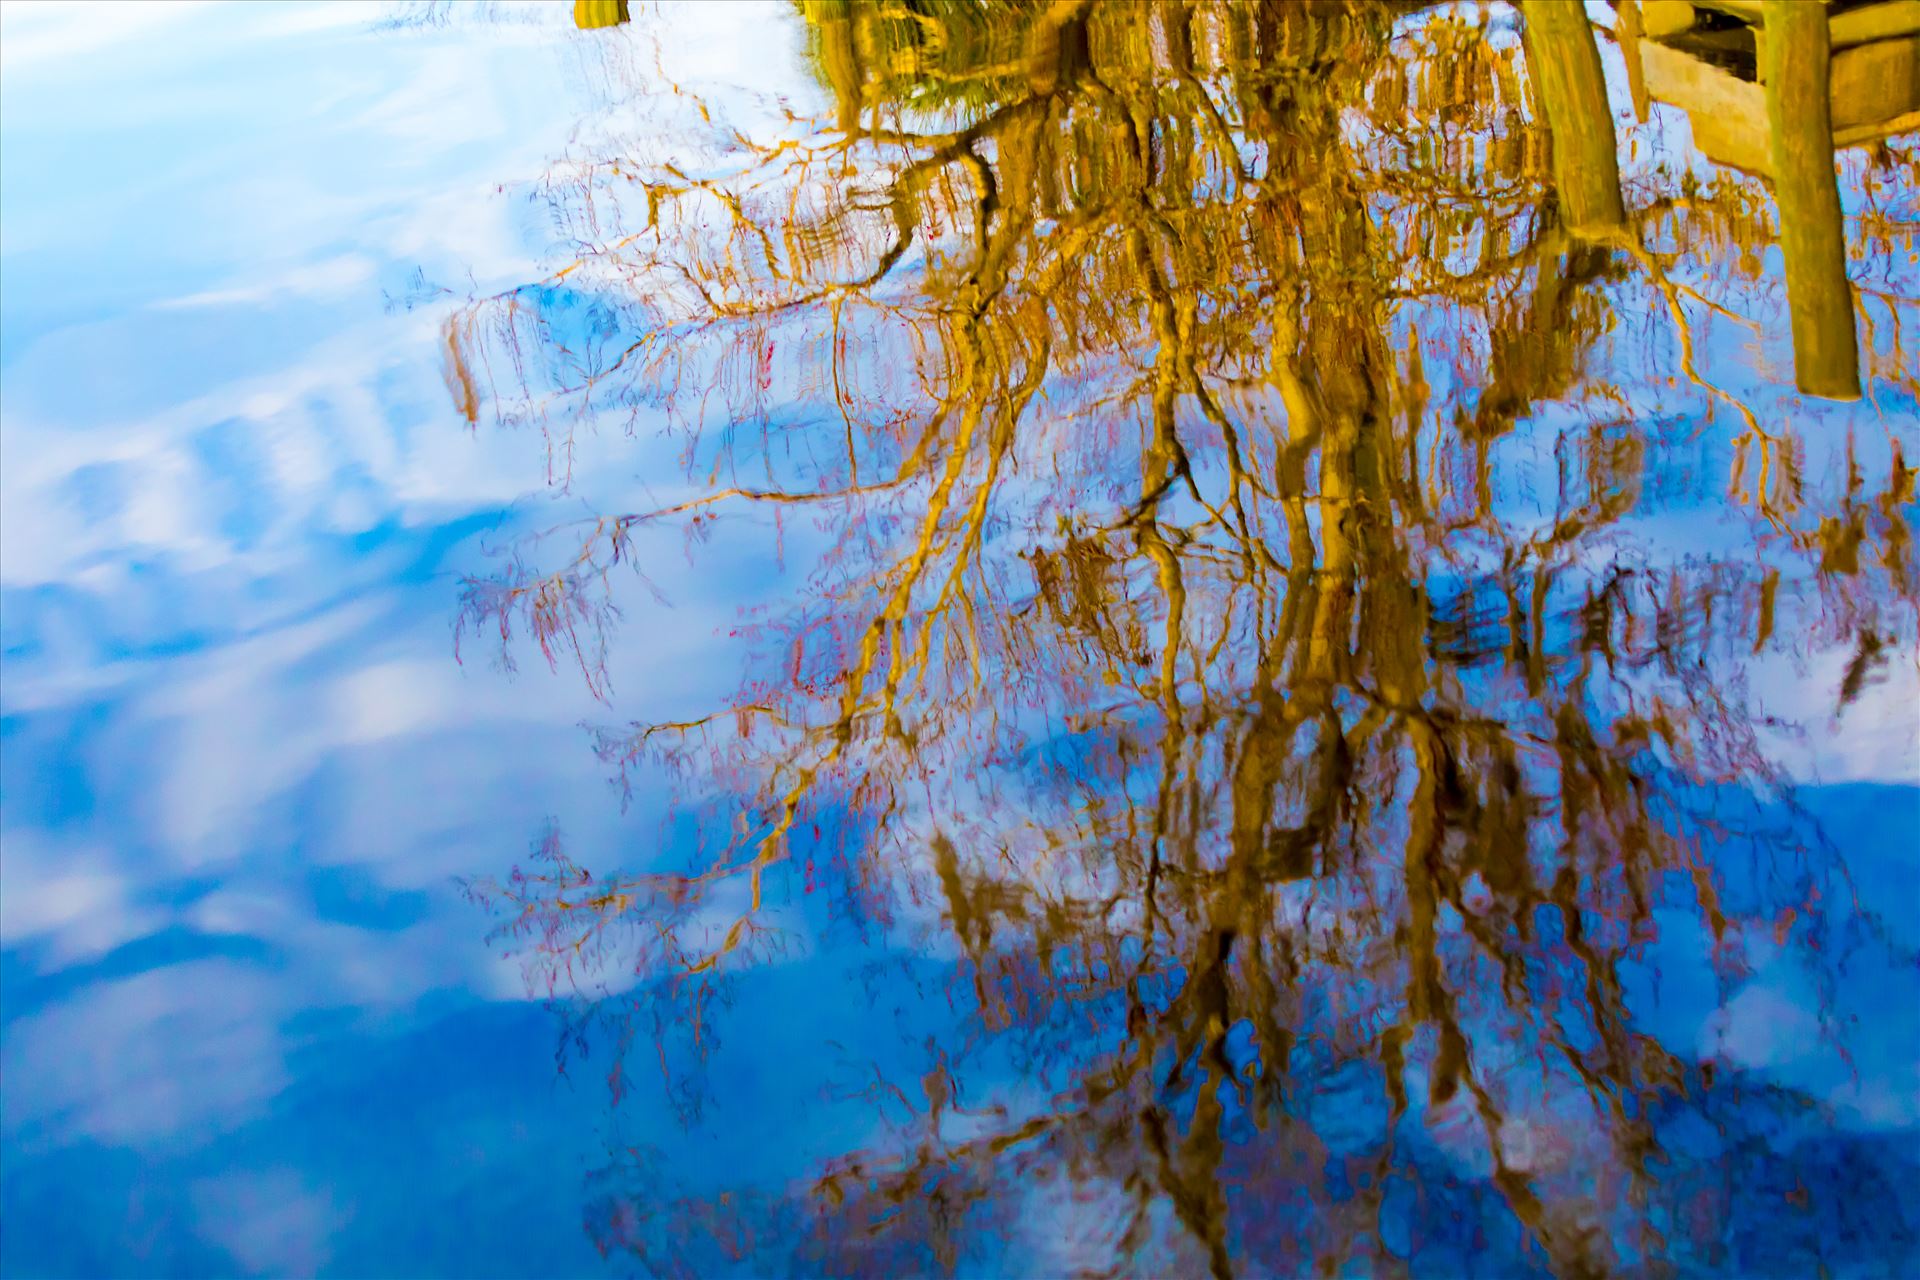 Reflections-5.jpg Blue sky, clouds, tree reflections on the water. by Cat Cornish Photography